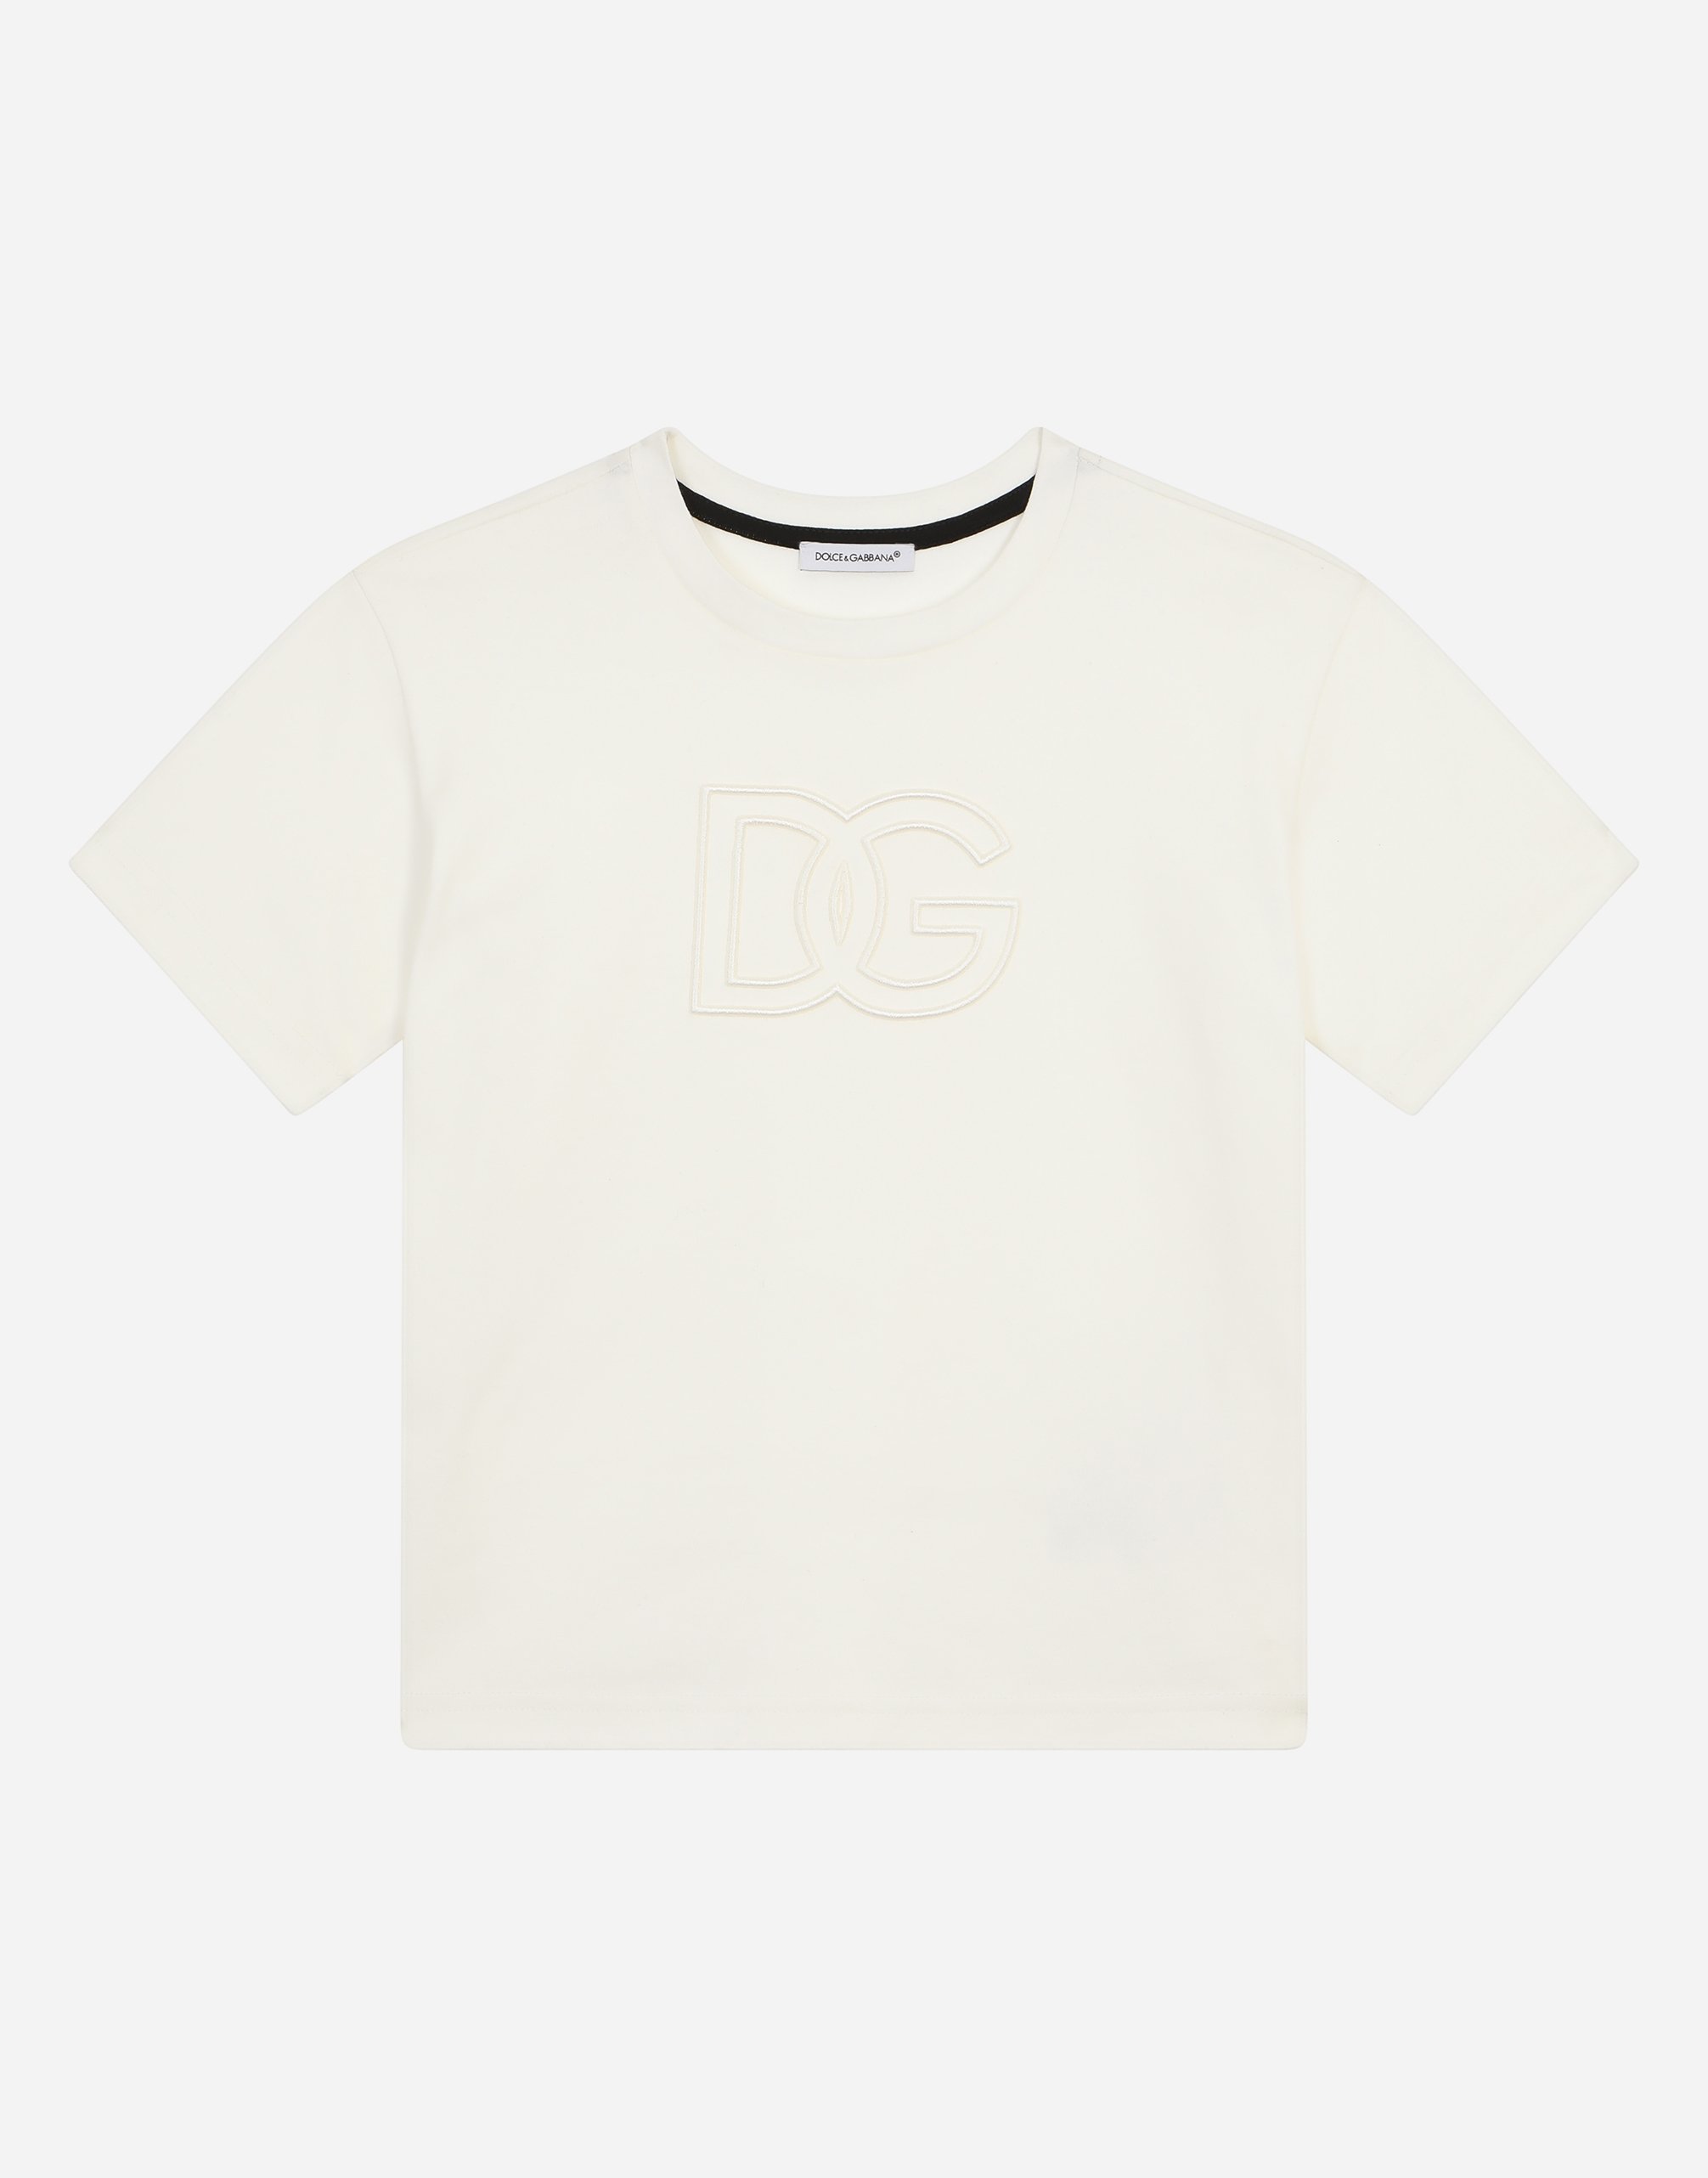 Interlock T-shirt with DG logo embroidery in White